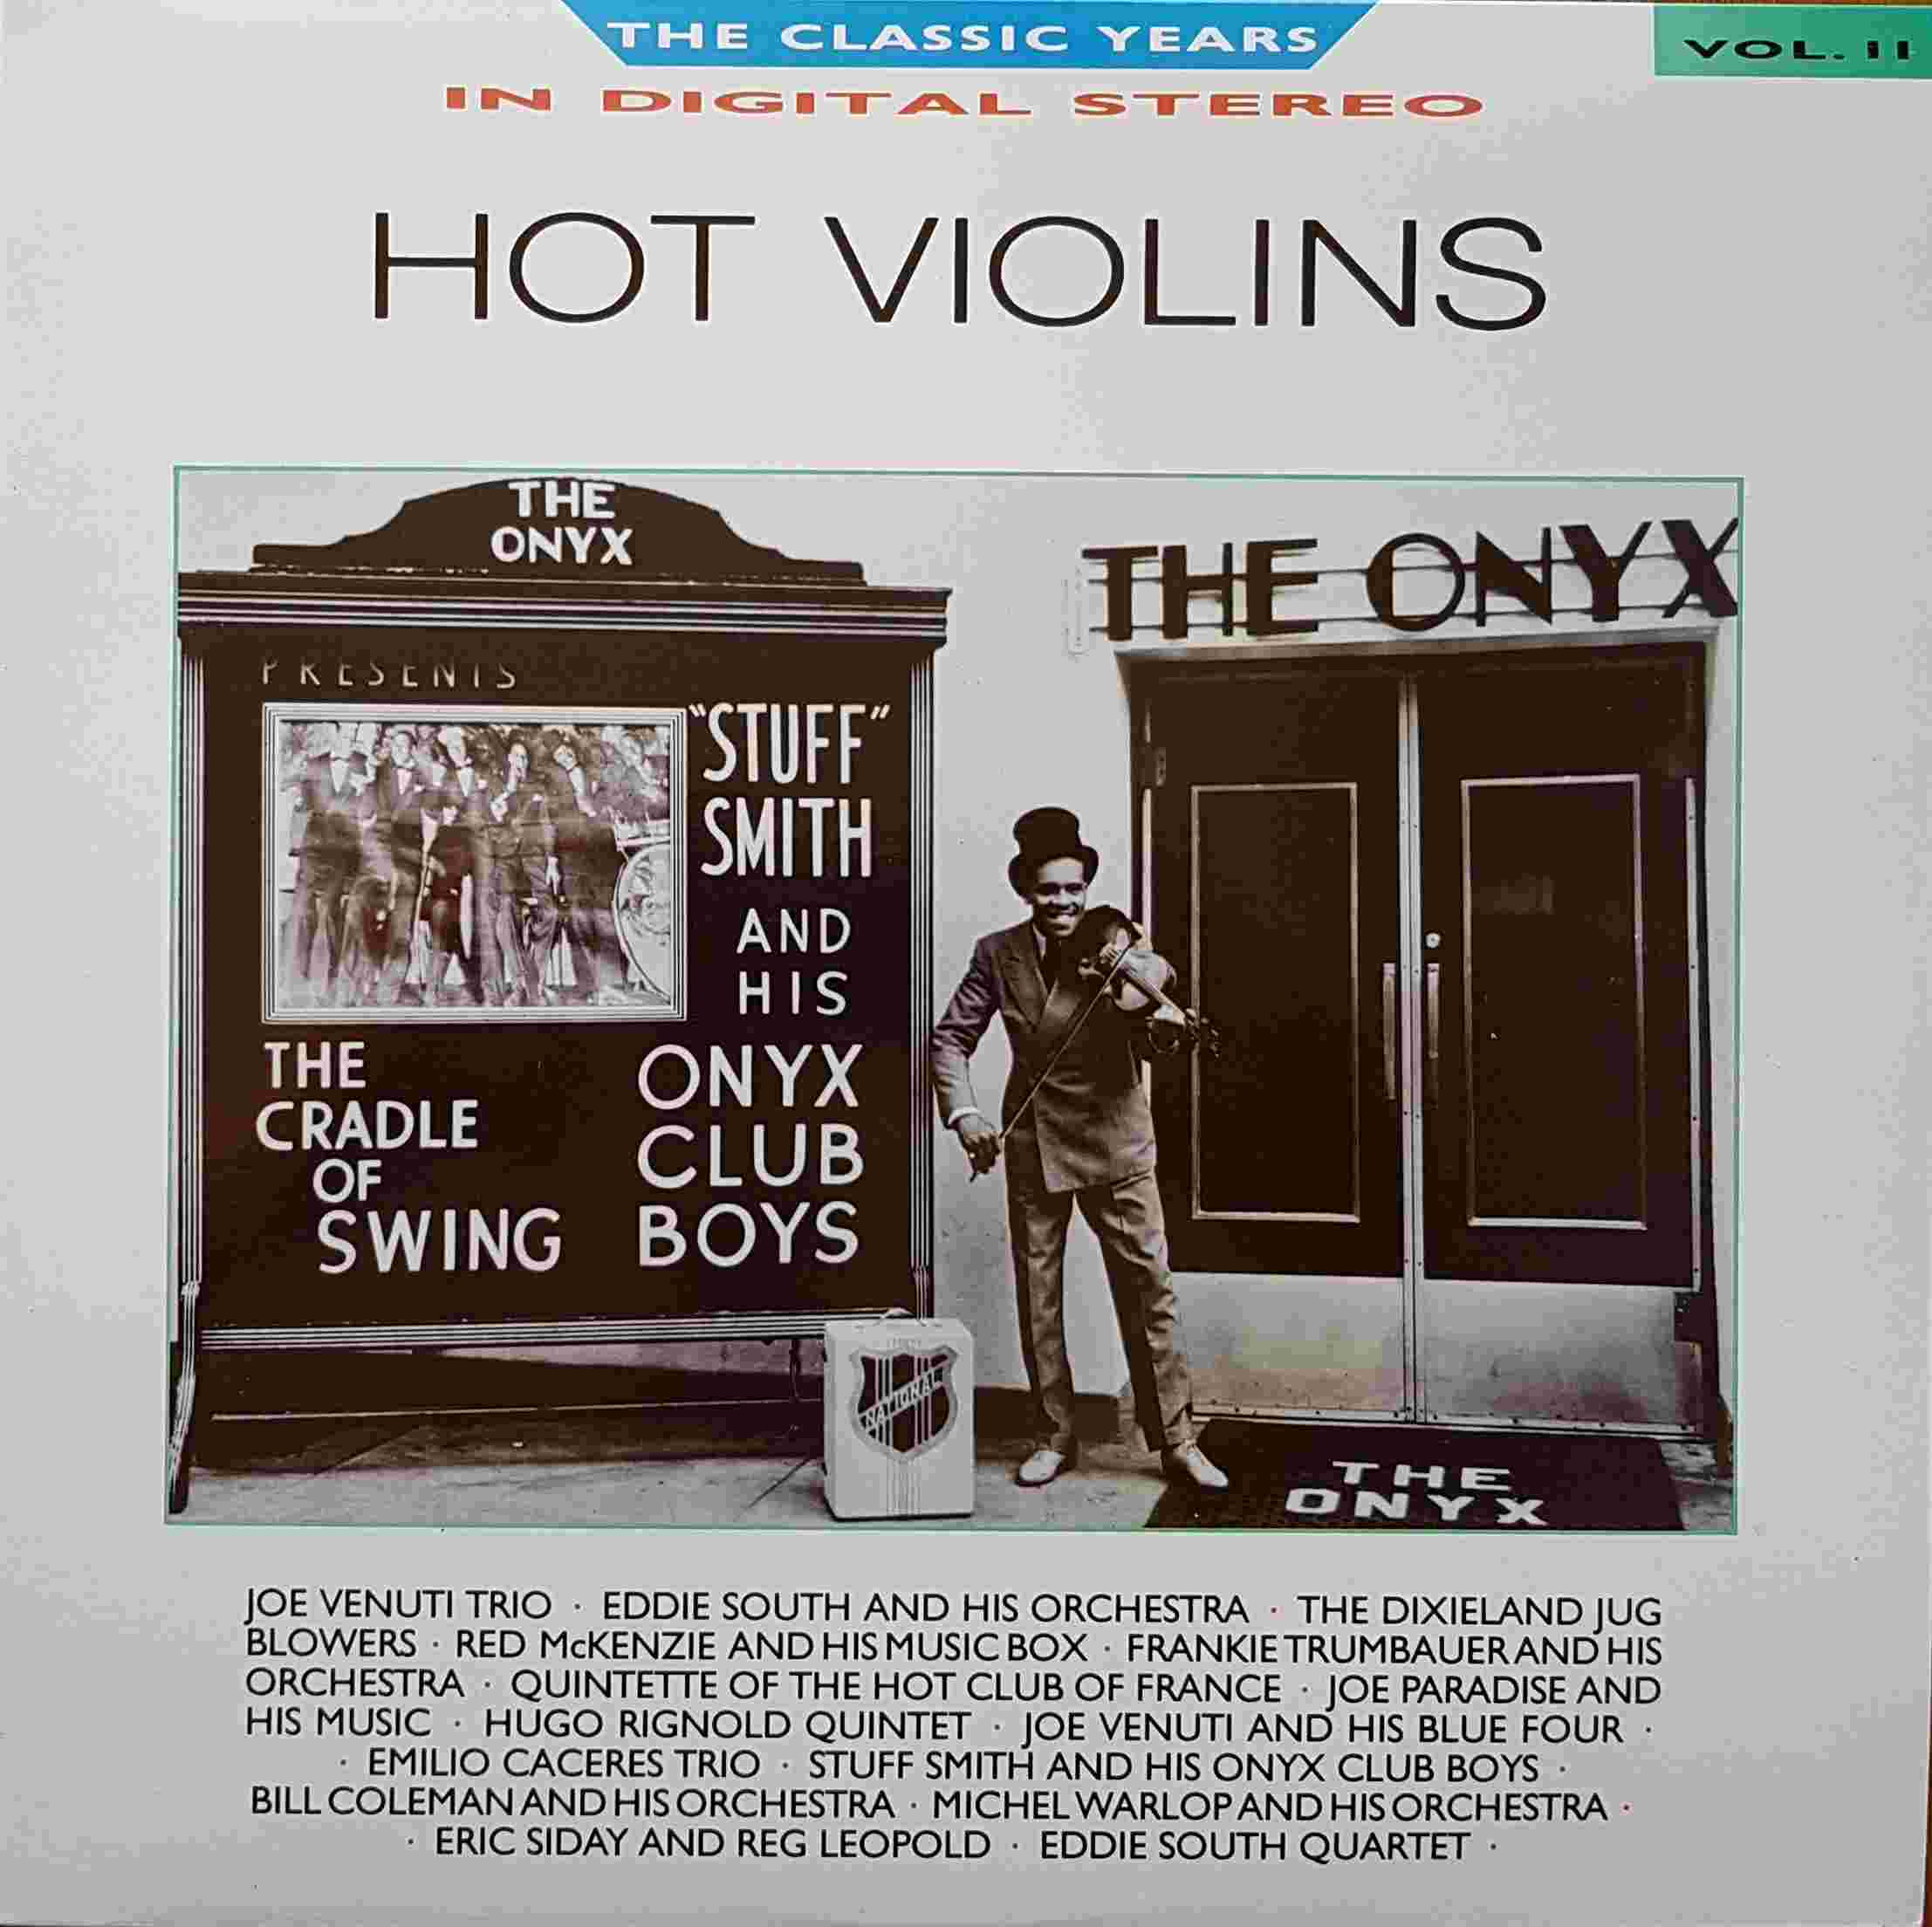 Picture of REB 680 Classic years - Volume 11, Hot violins by artist Various from the BBC albums - Records and Tapes library